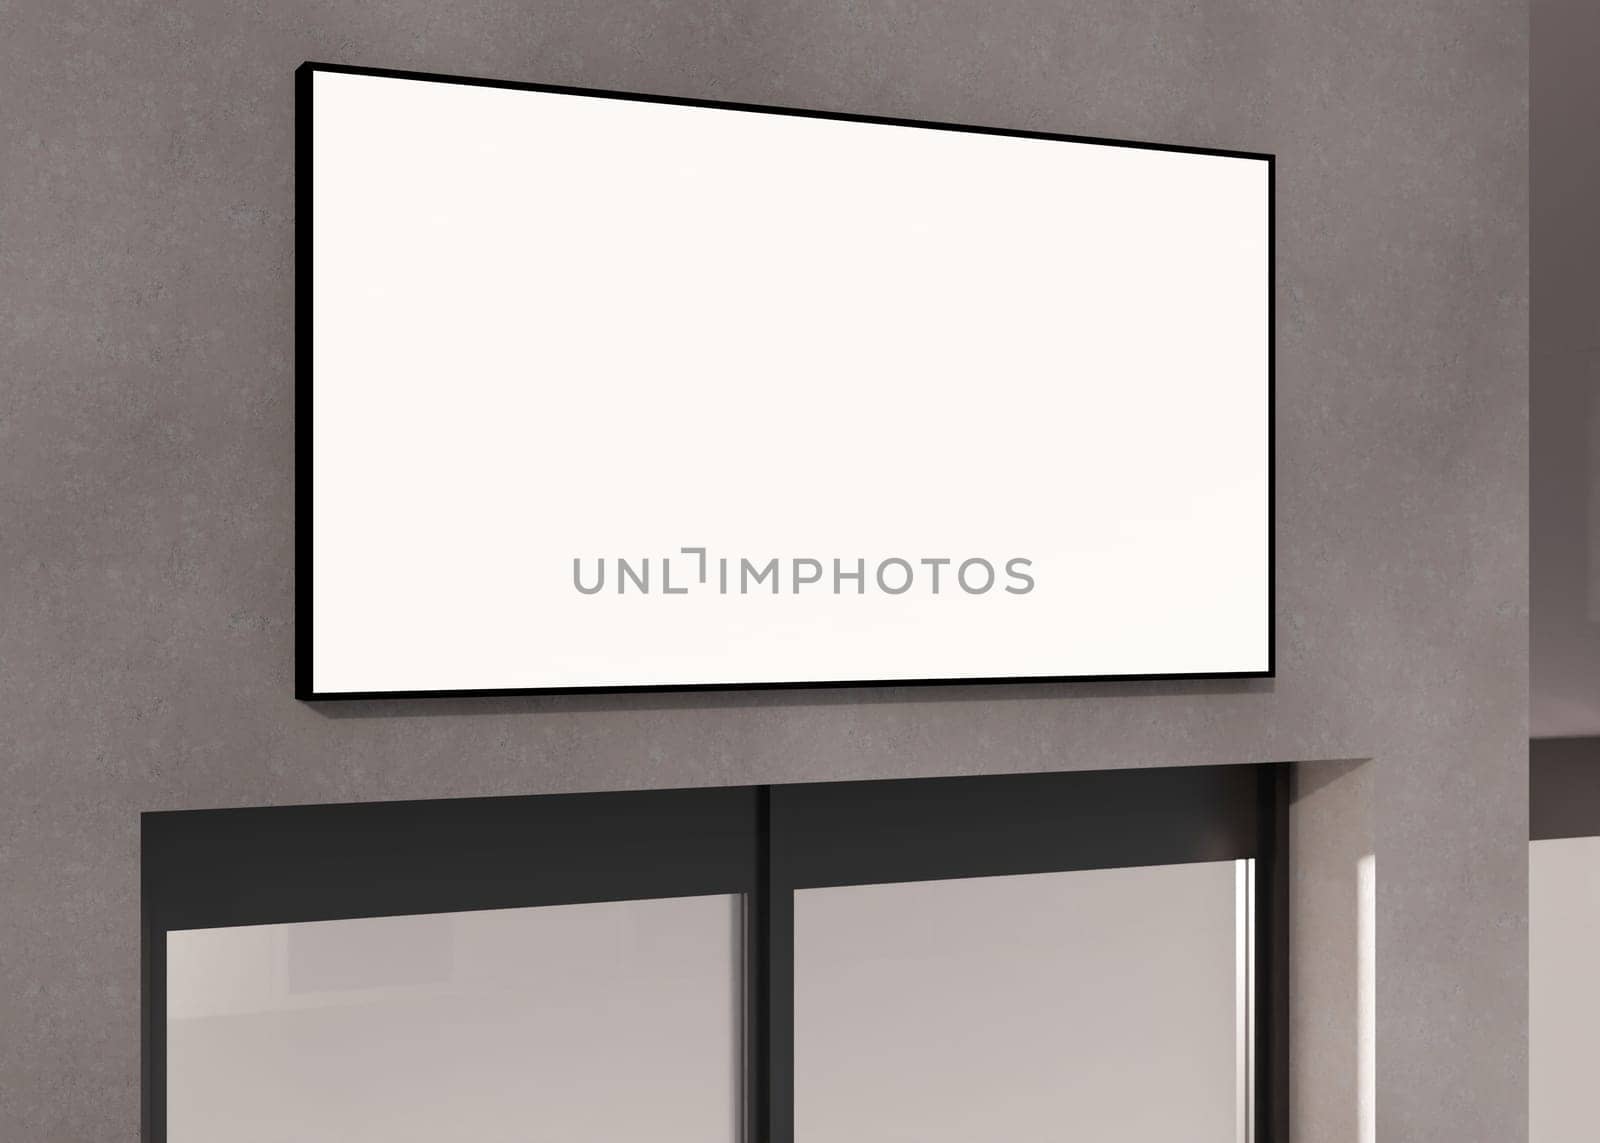 A modern rectangular blank signboard on a textured grey wall above a entry, ideal for businesses to showcase logos or advertising. Shop, office, company signboard. Illuminated lightbox. 3D. by creativebird